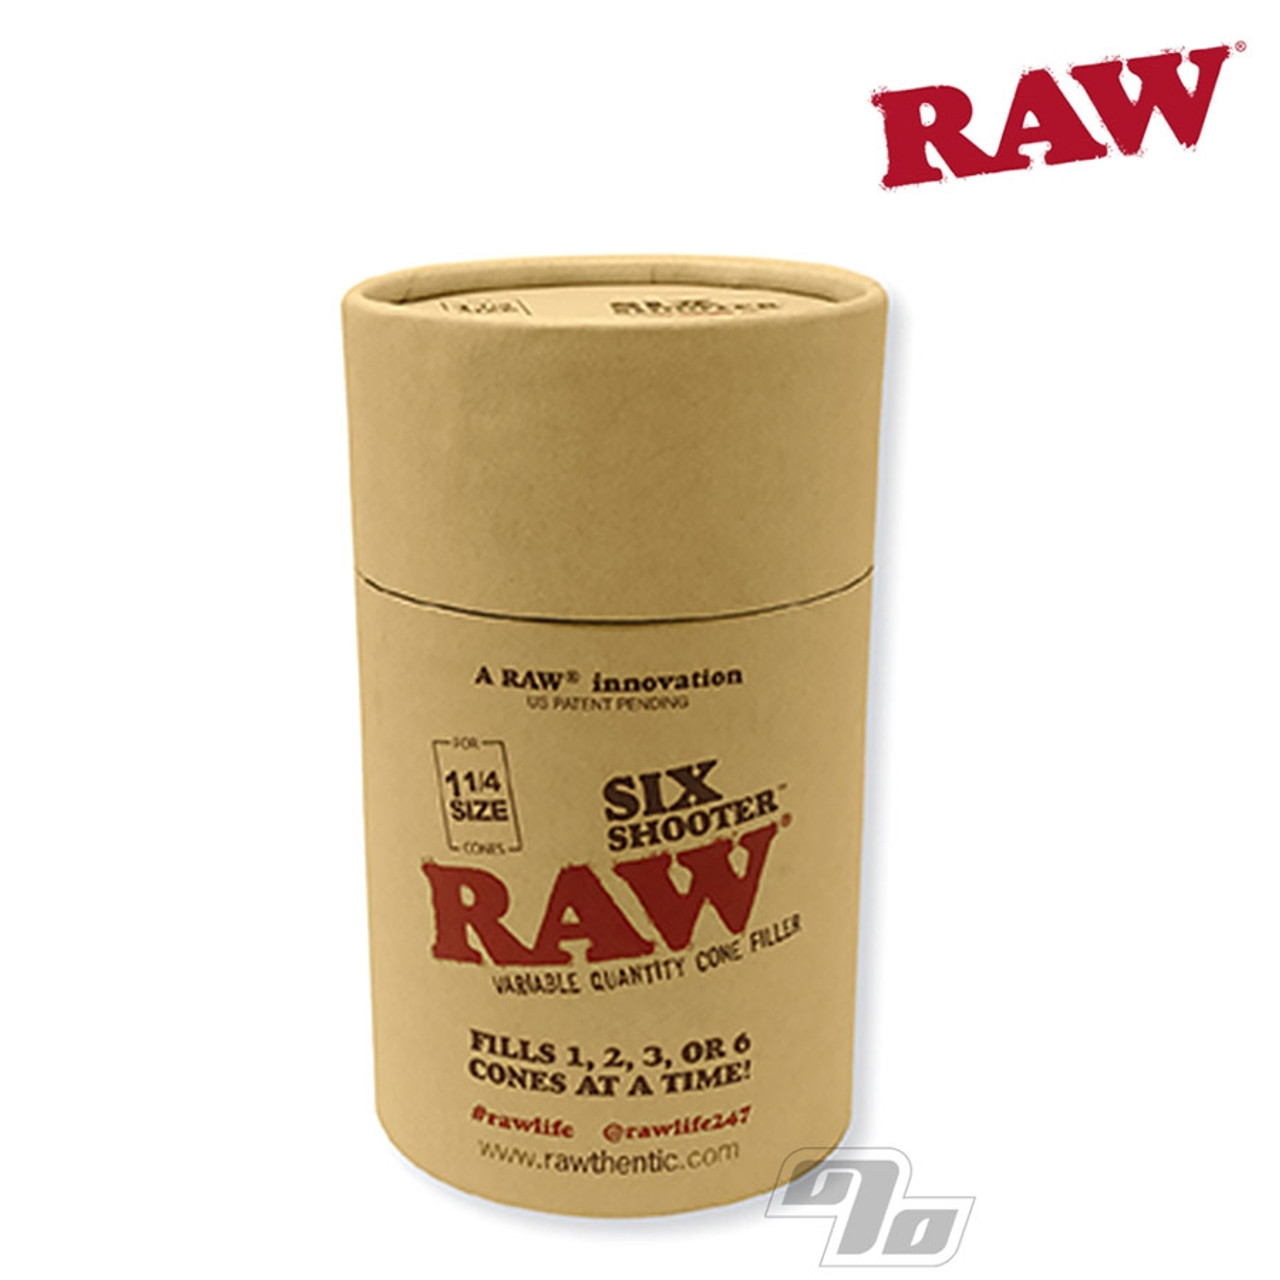 RAW Six Shooter Cone Filler for loading 1 1/4 Size RAW cones